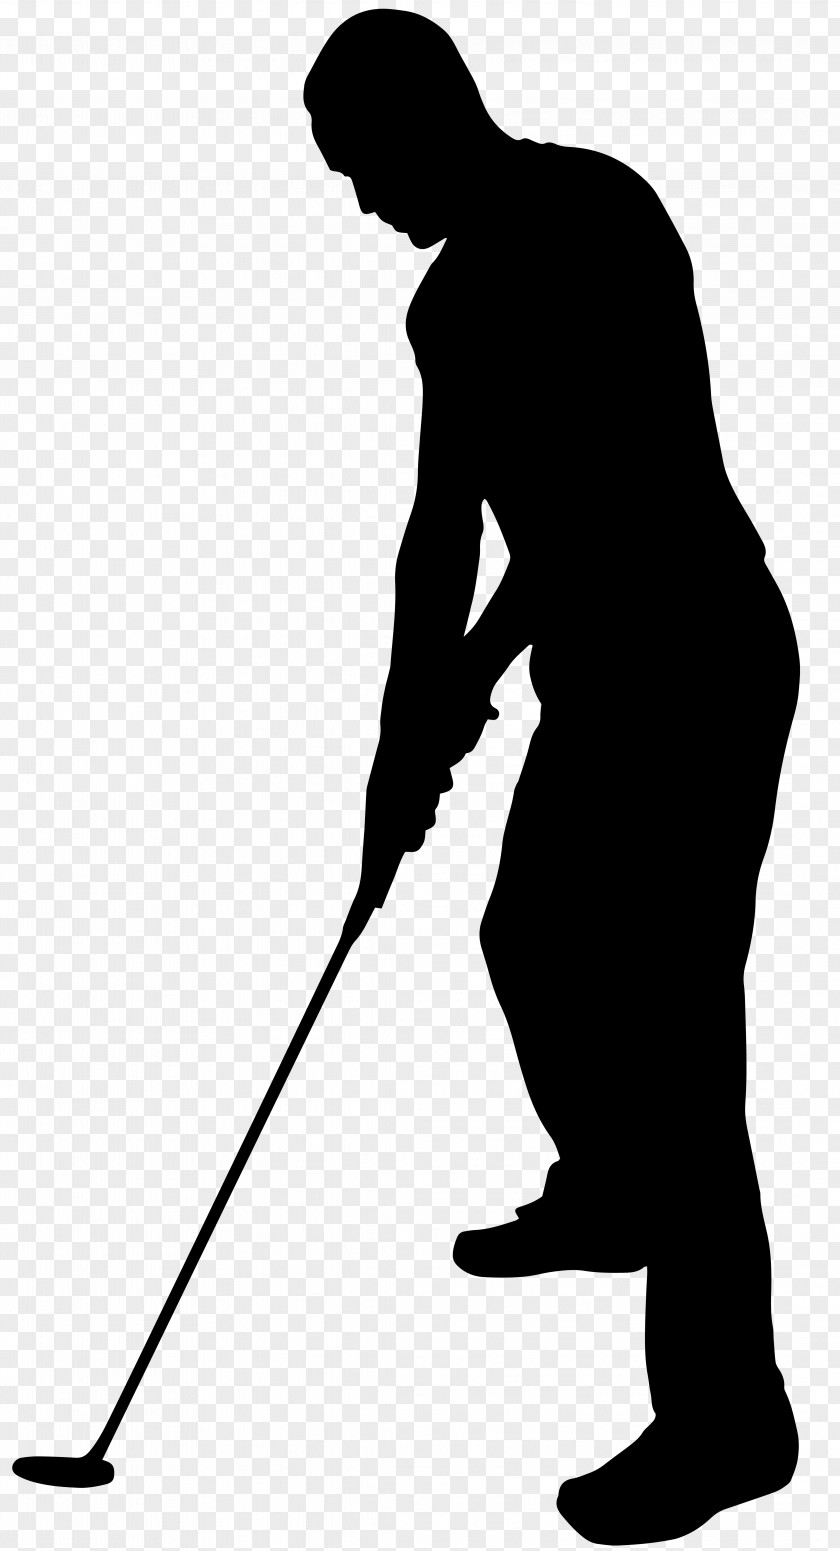 Golf Player Silhouette Clip Art Image File Formats Lossless Compression PNG